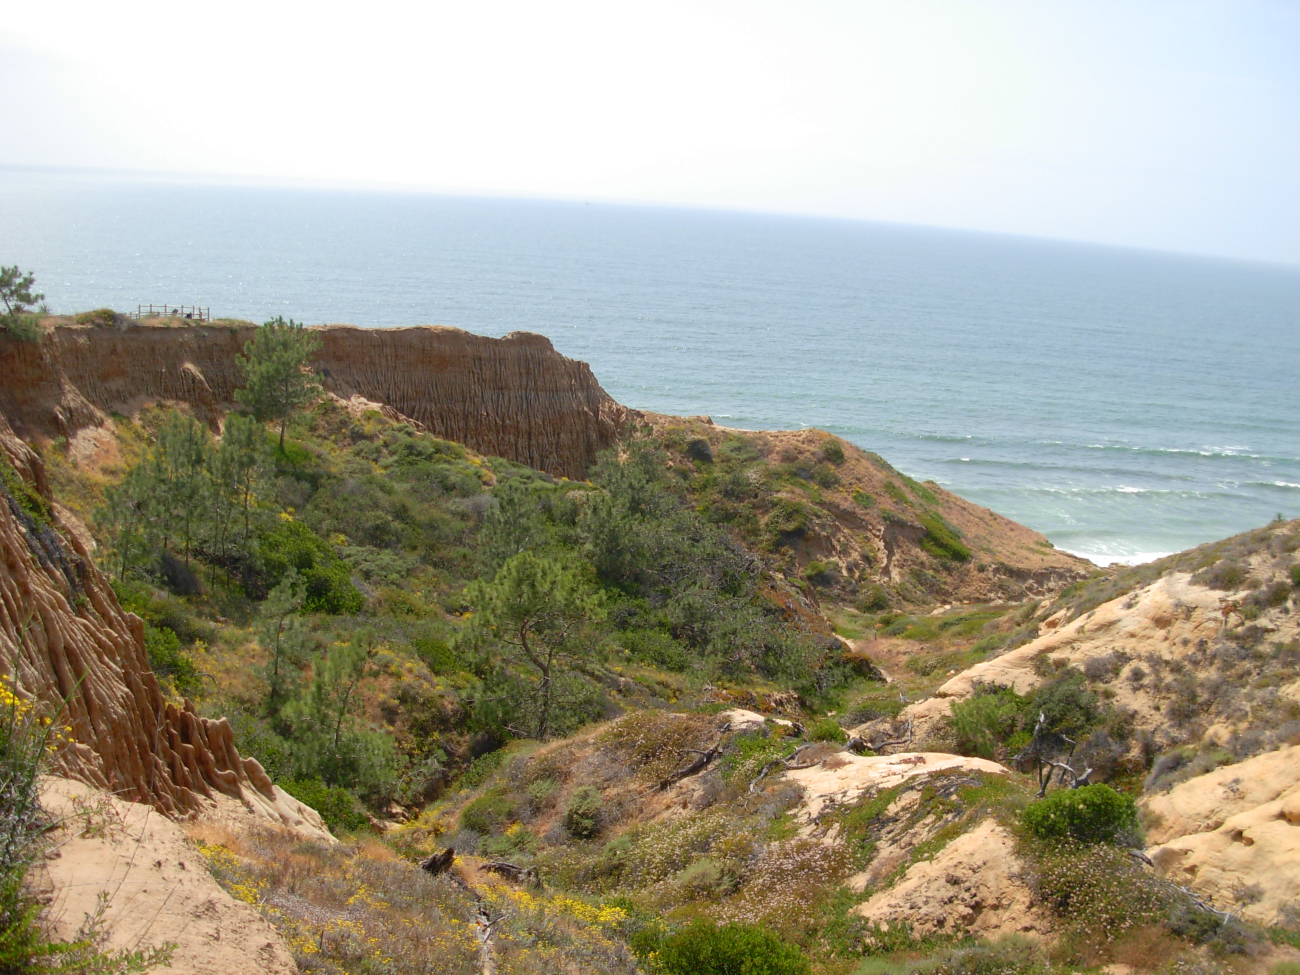 Looking down an arroyo at Torrey Pines State Park to the Pacific Ocean